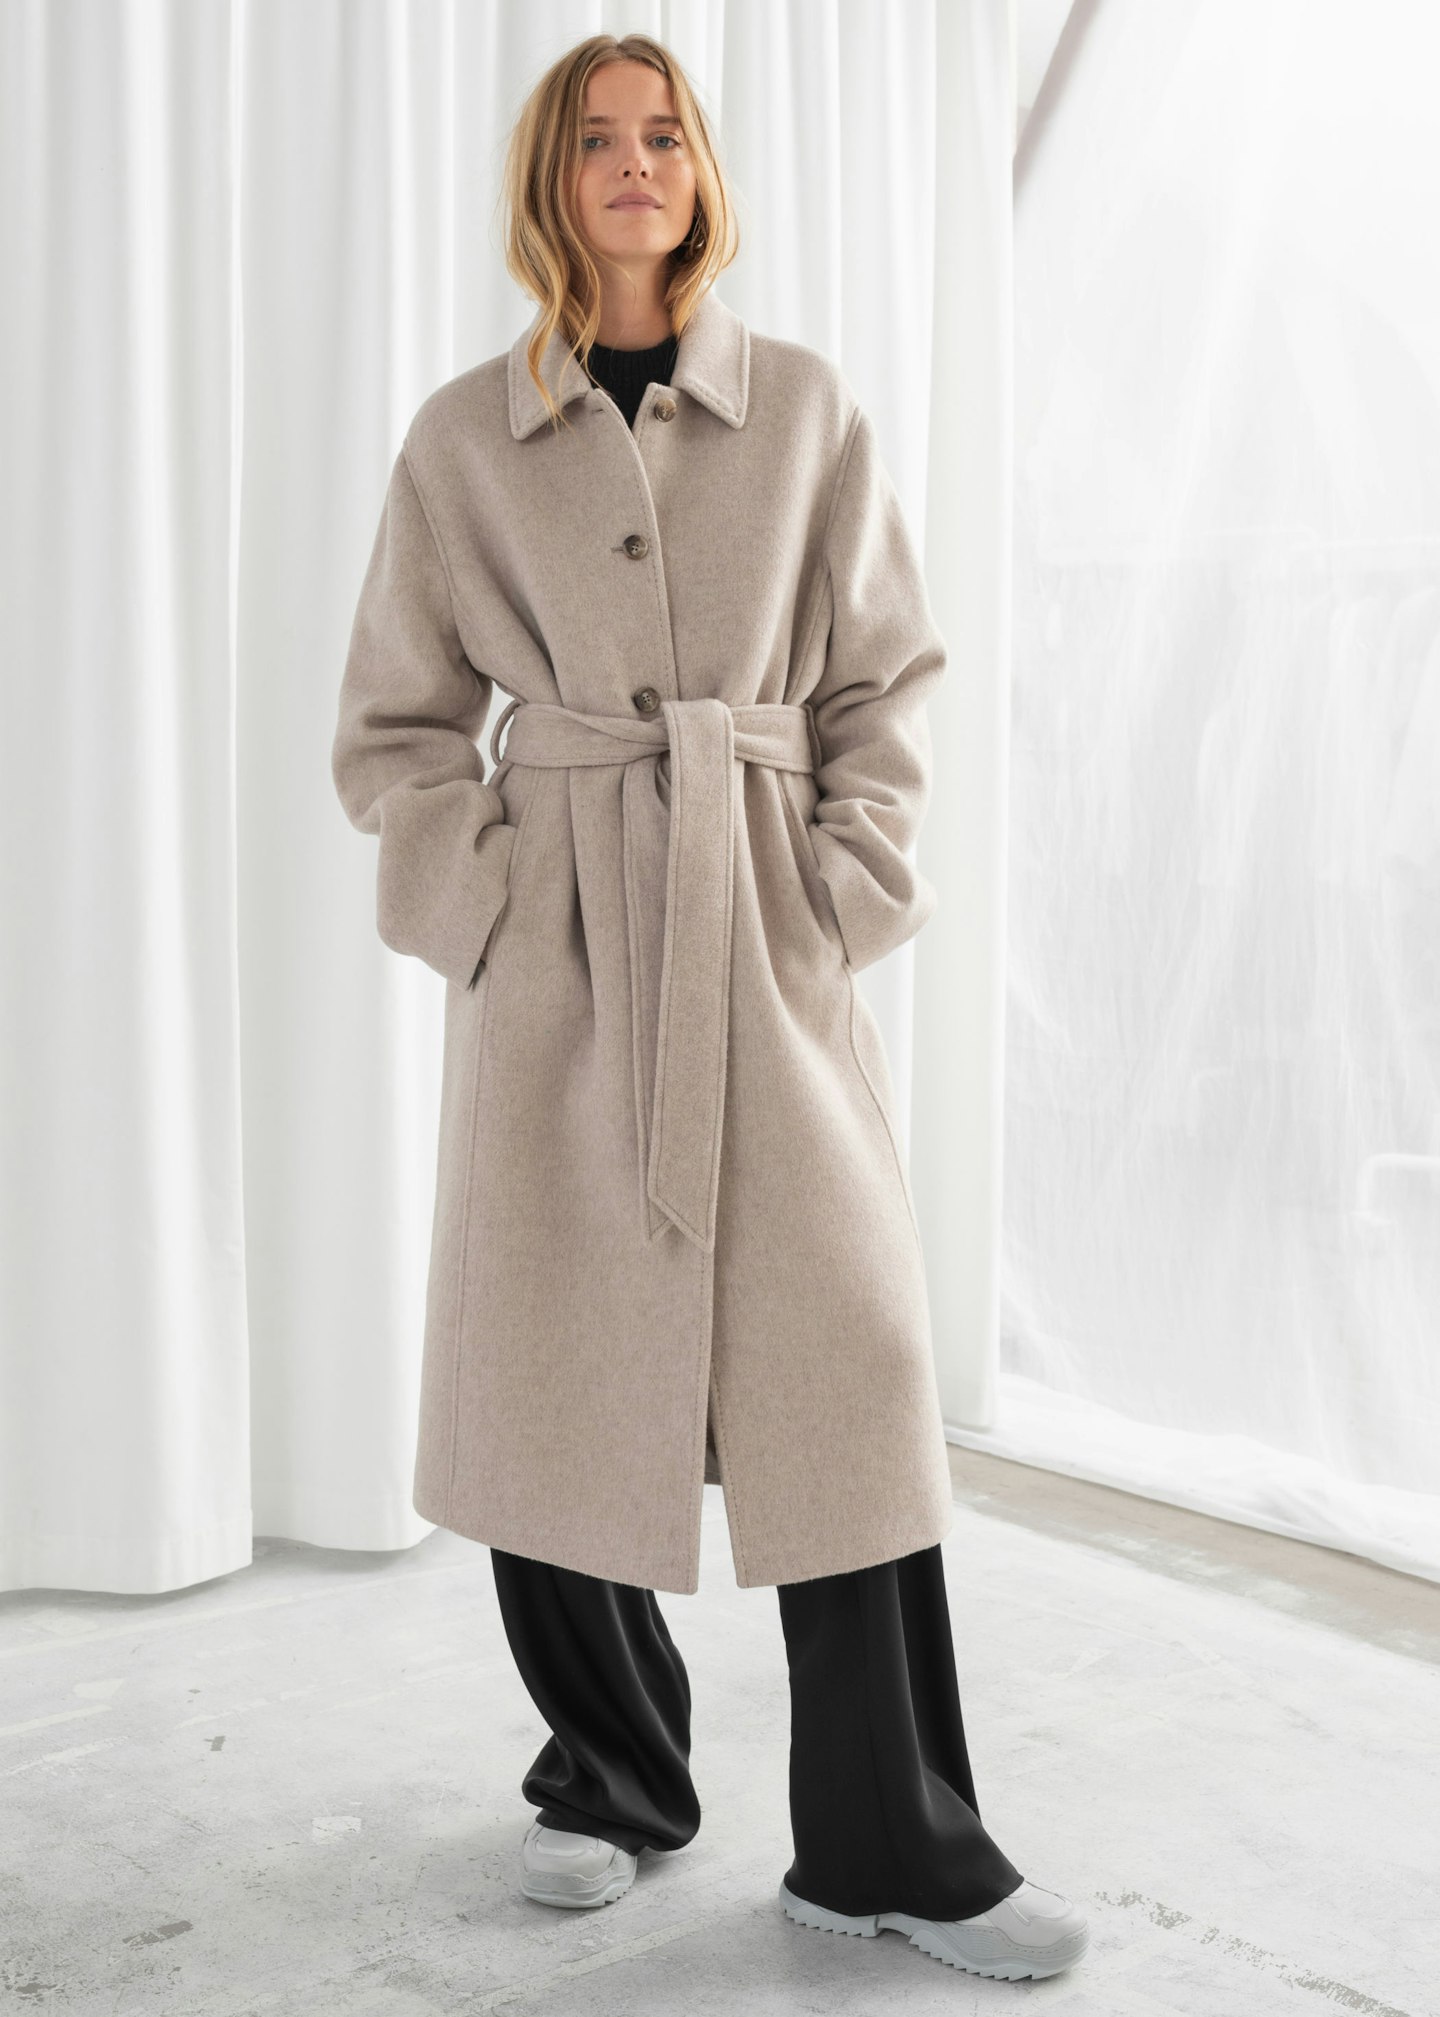 & Other Stories, Wool Blend Oversized Long Coat, £205